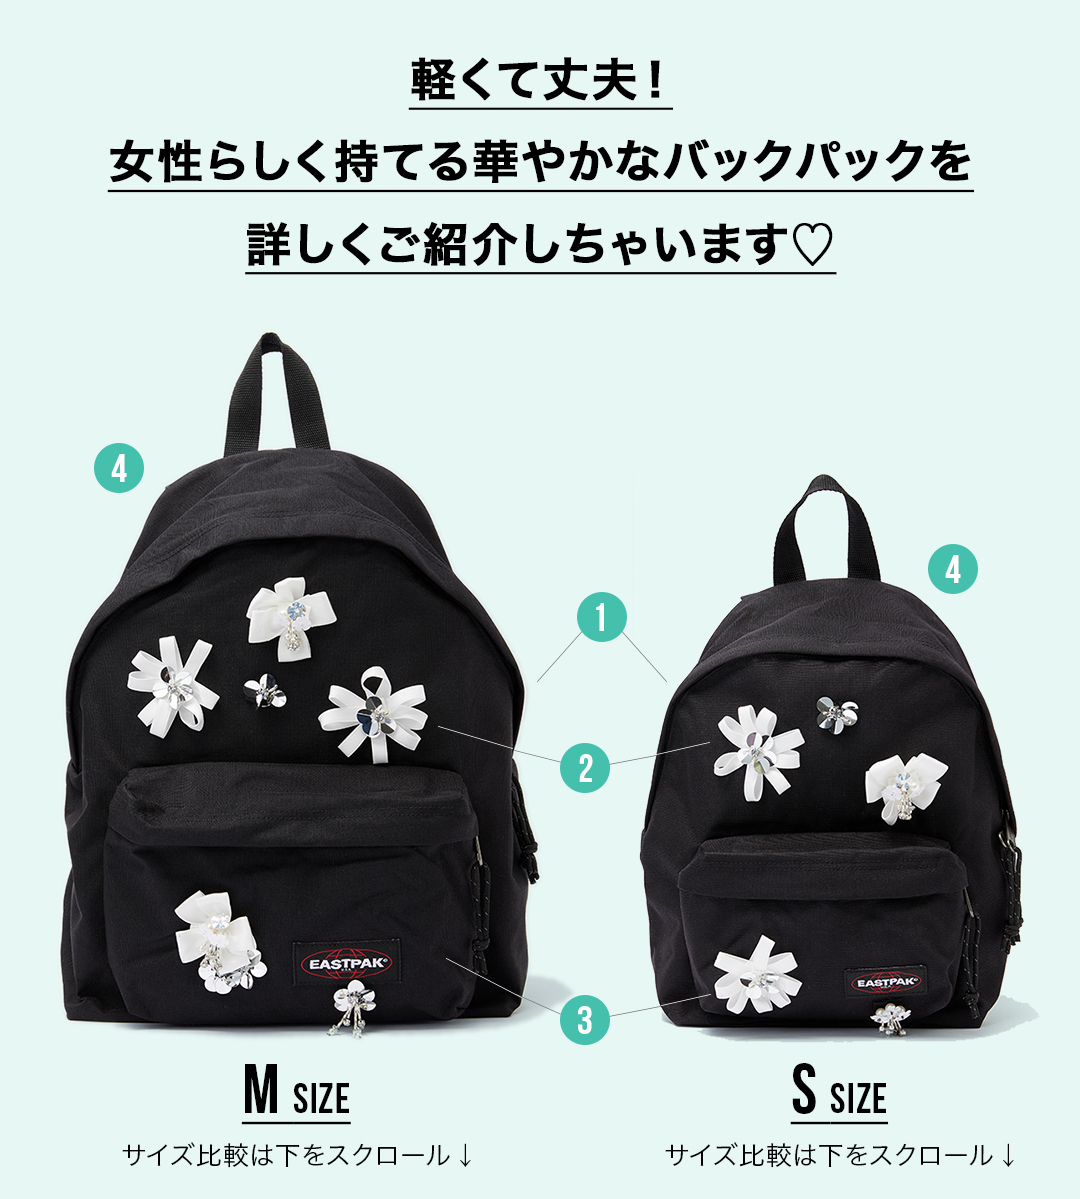 Chesty（チェスティ）EASTPAK｜公式通販サイト